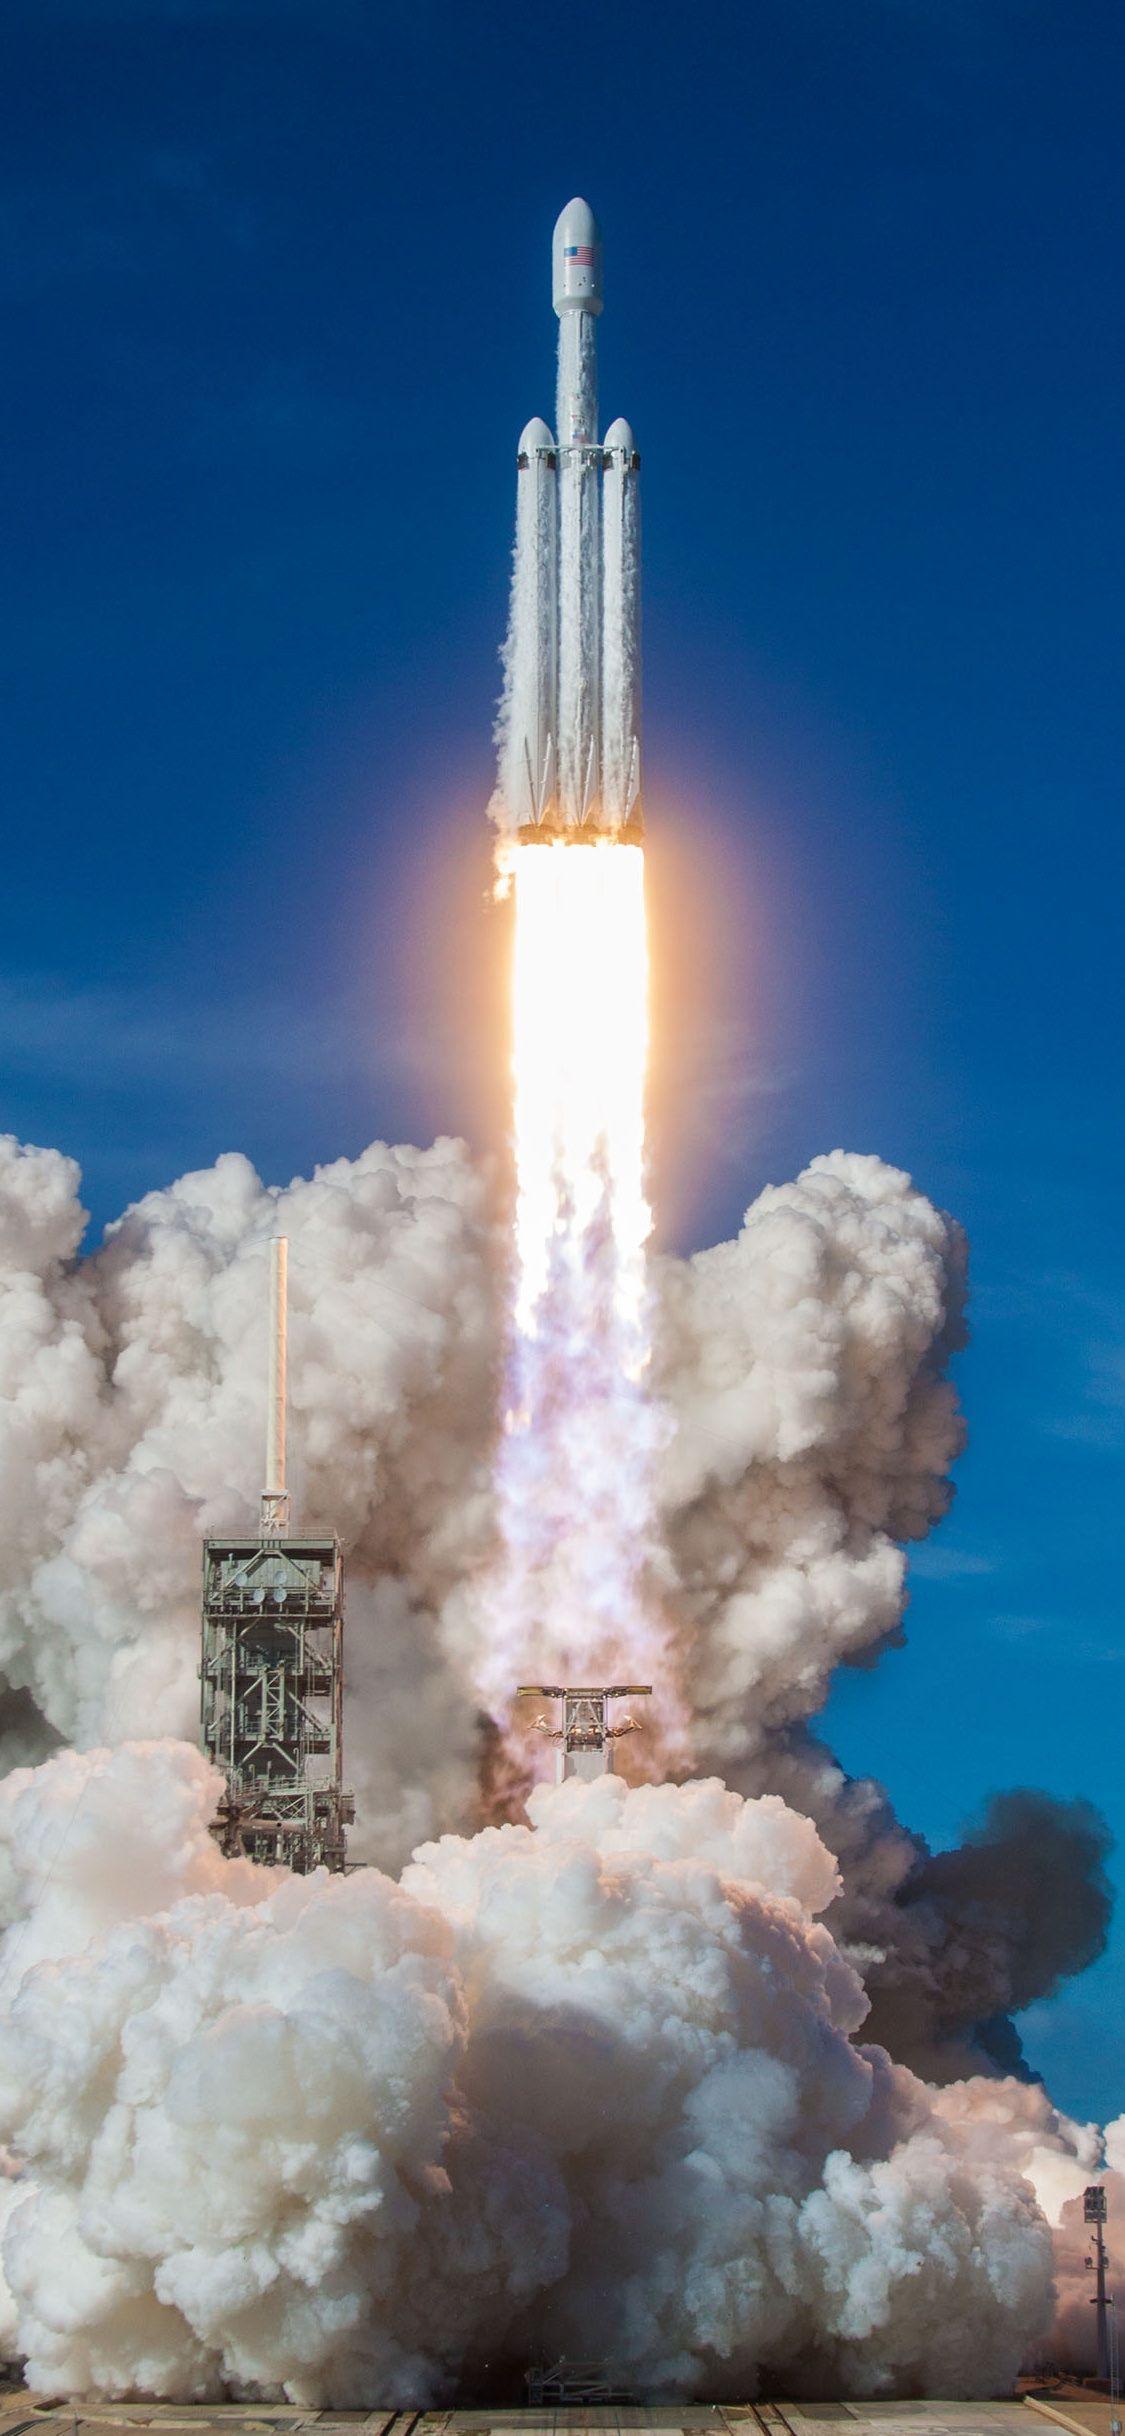 SpaceX Wallpaper Free SpaceX Background